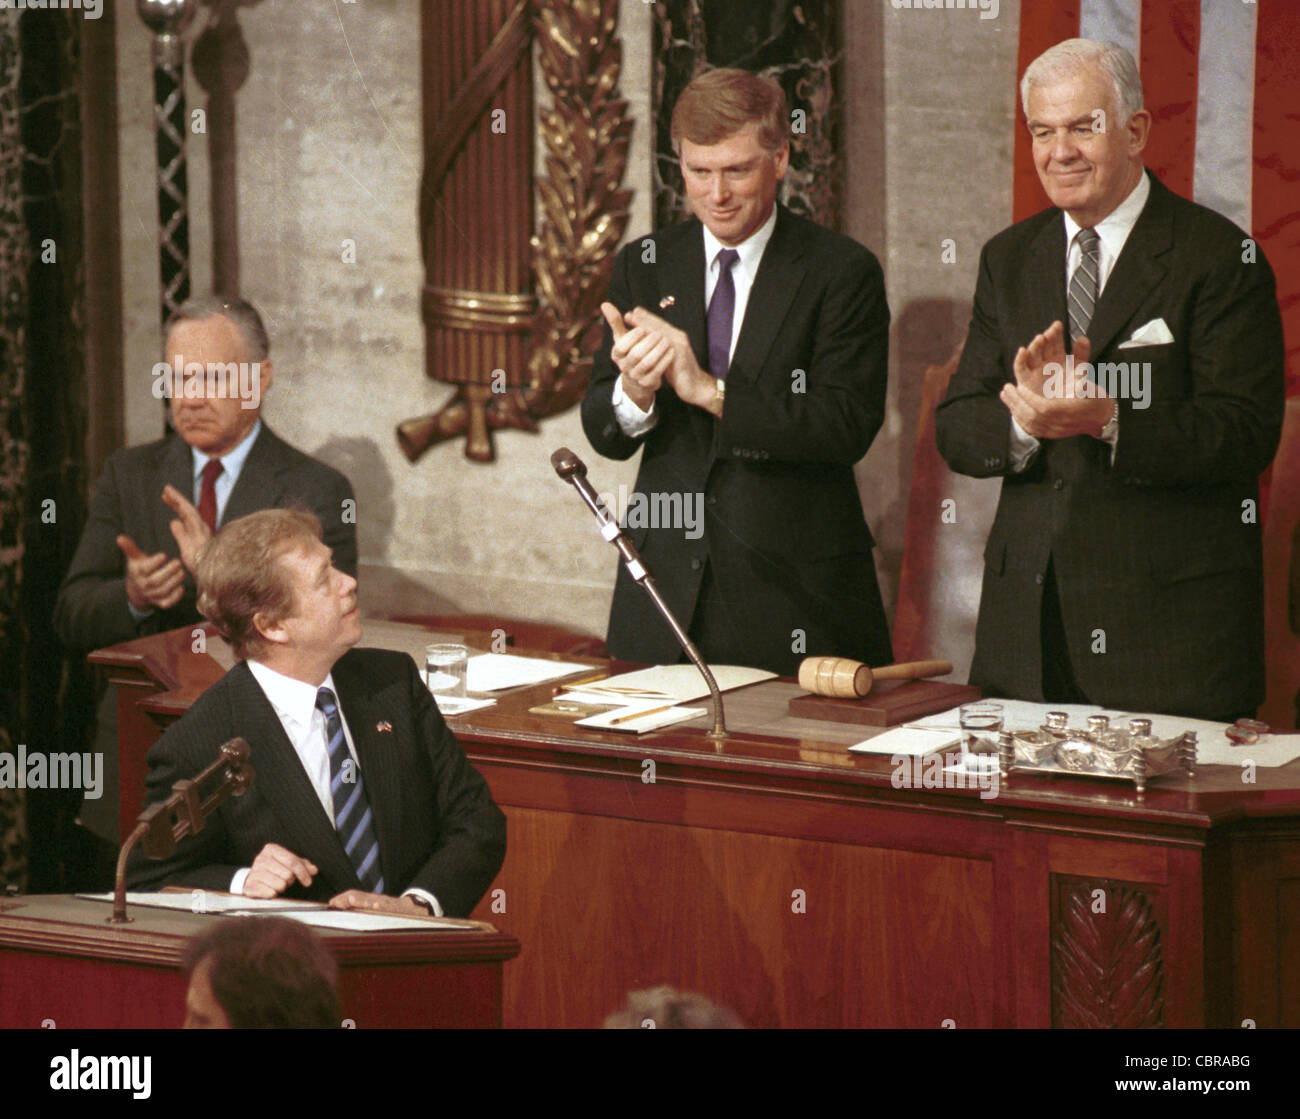 U.S. Vice-President Dan Quayle, second from right, and Speaker of the House Thomas Foley, right, applaud as Czechoslovak Stock Photo